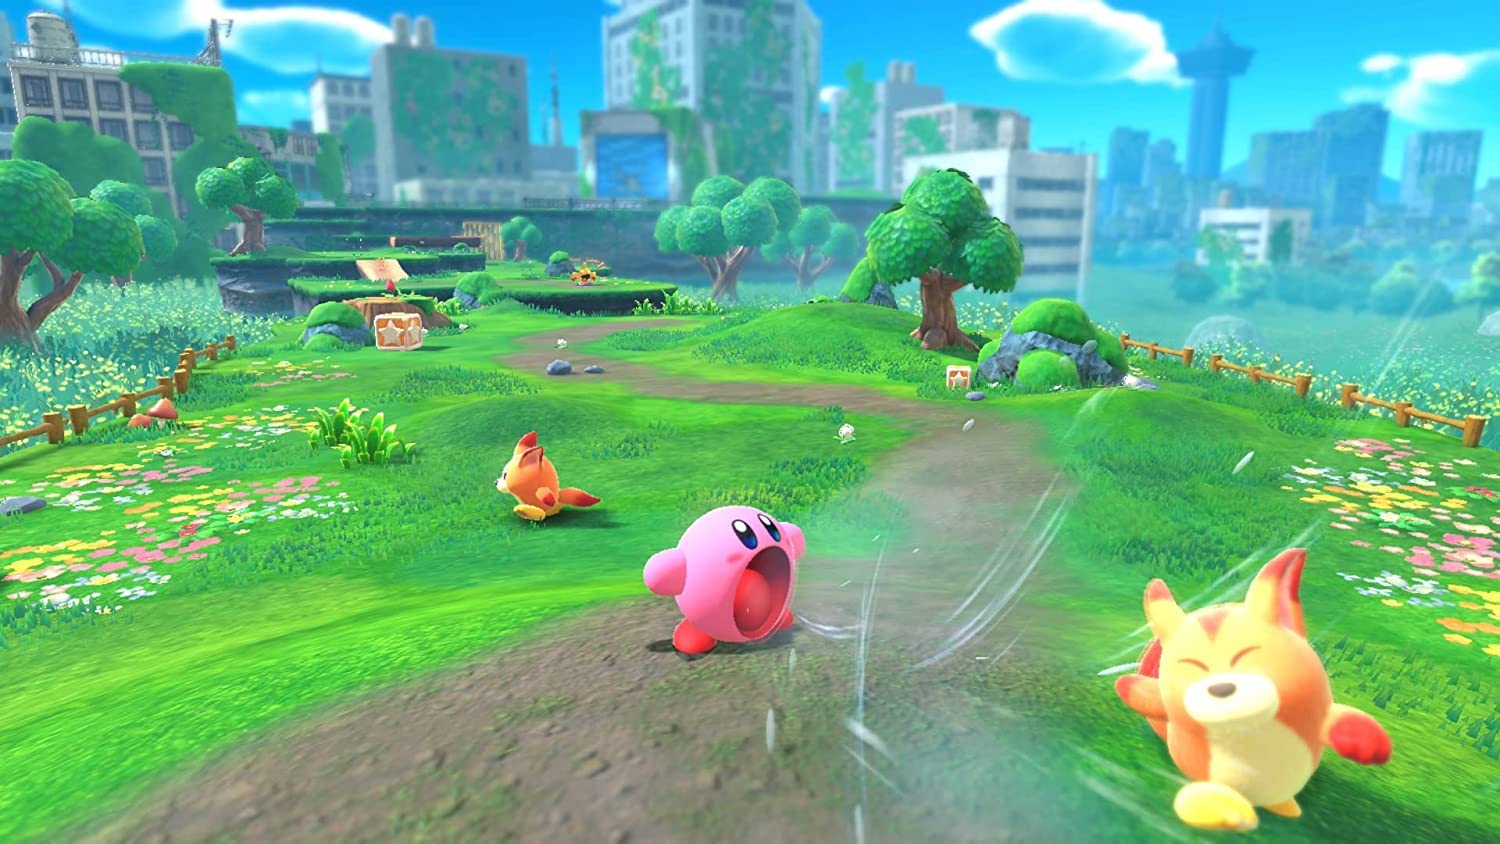 Kirby and the Forgotten Land screen where Kirby inhales an enemy against a backdrop of a ruined city overgrown with vines and plants